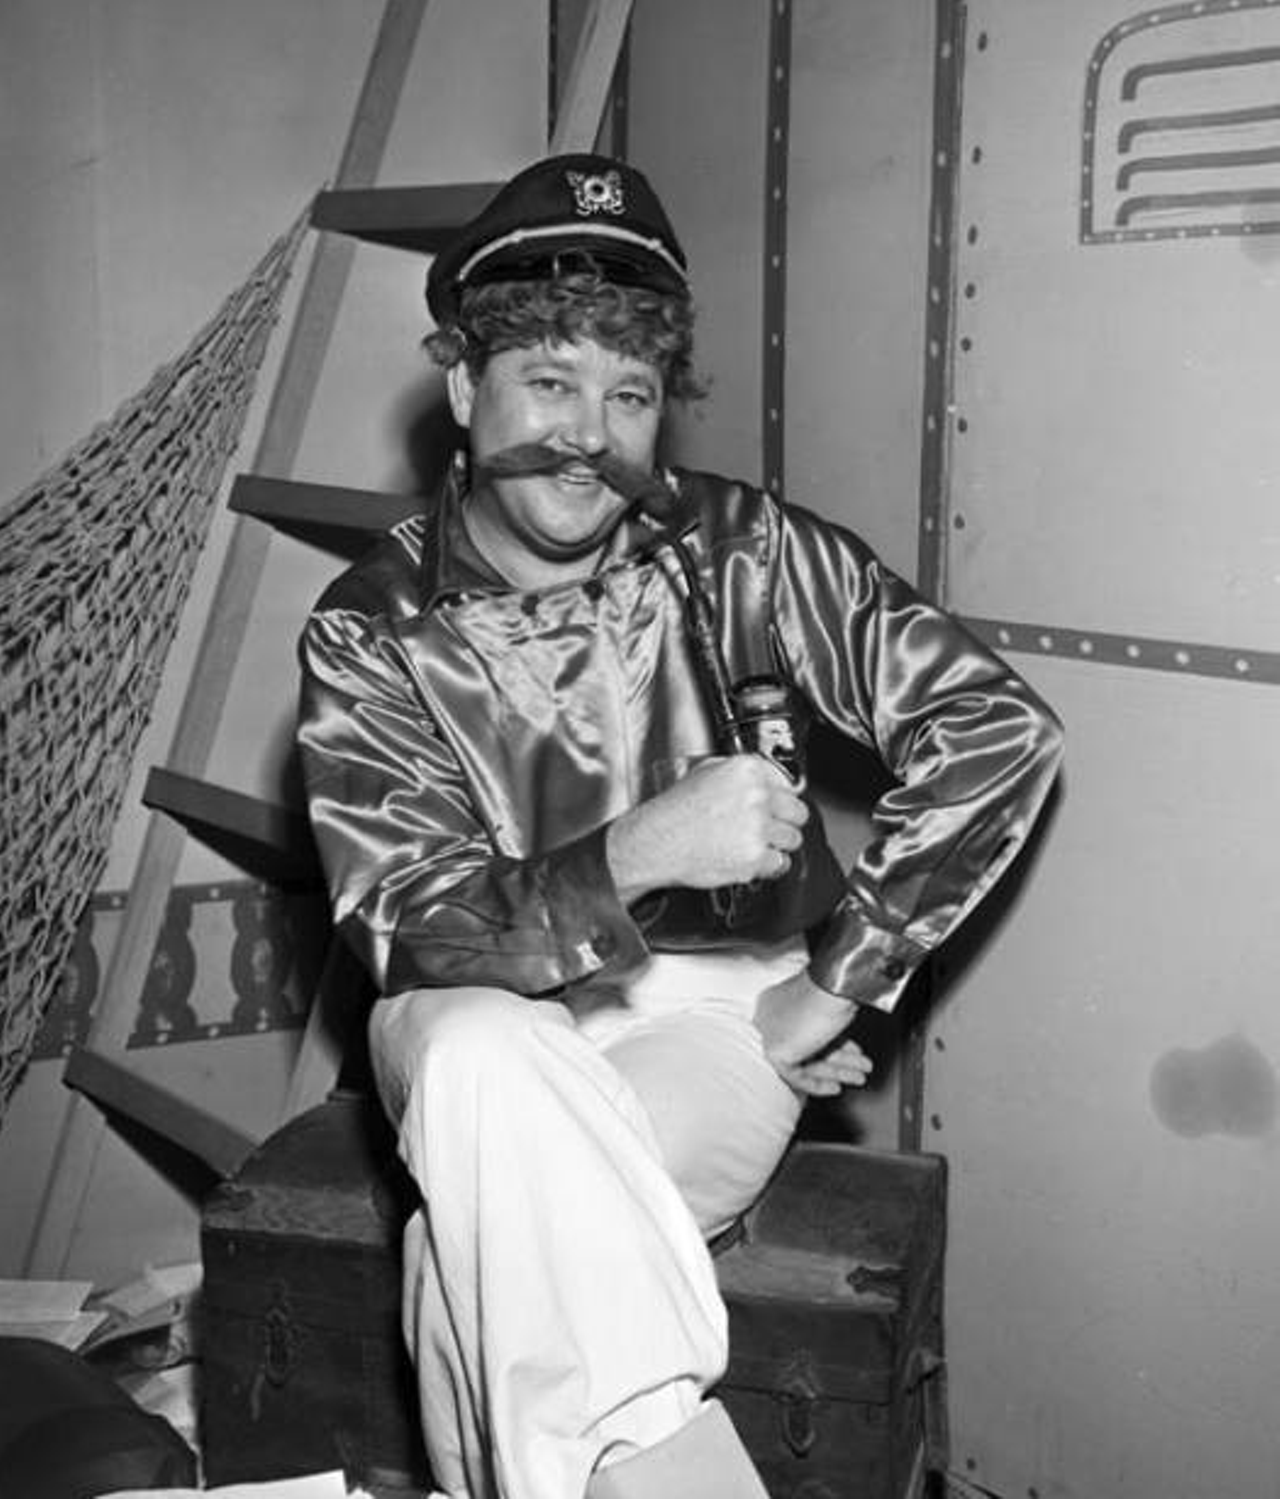 Captain Gus
Ba-ding bing! Older folks will remember Captain Gus from the childhood. The character, played by Joe Alston, was part of the children’s program that ran from 1953 to 1979. The local personality passed away in 1989 at the age of 71.
Photo via UTSA Libraries Digital Collections